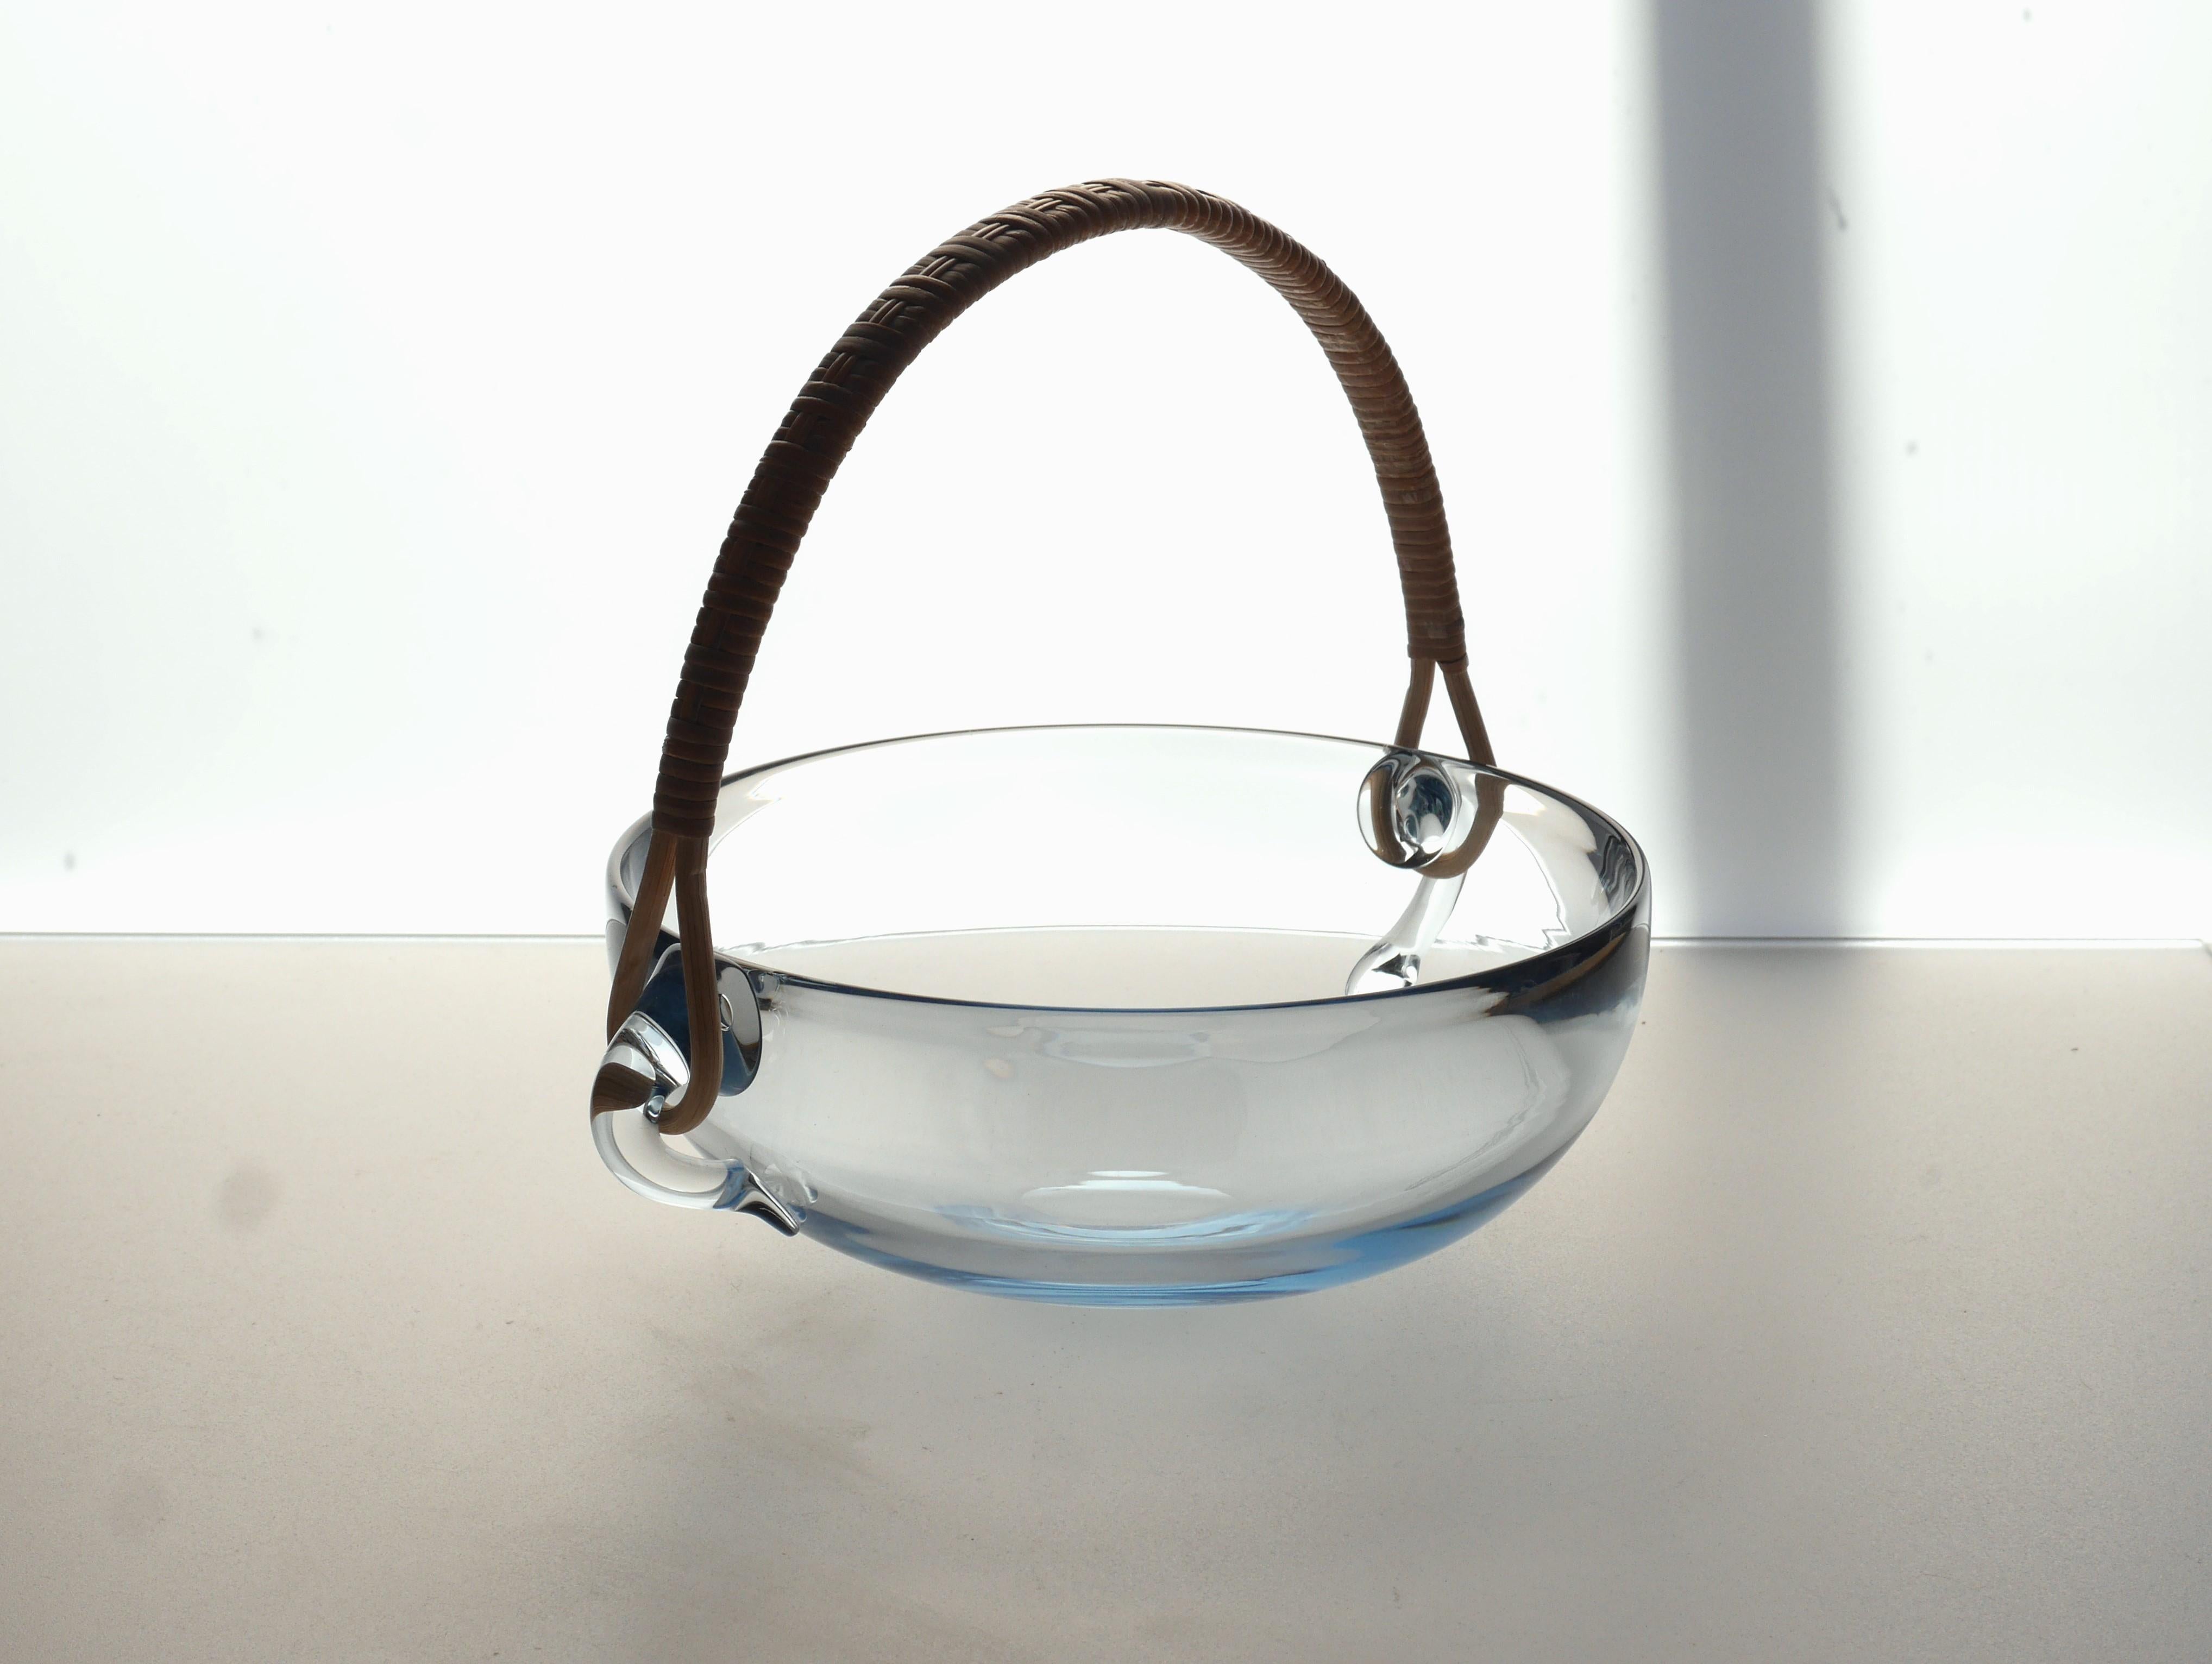 Hand-Crafted Beautiful Pale Blue Glass Bowl with a Wicker Handle from Holmeegard, Denmark